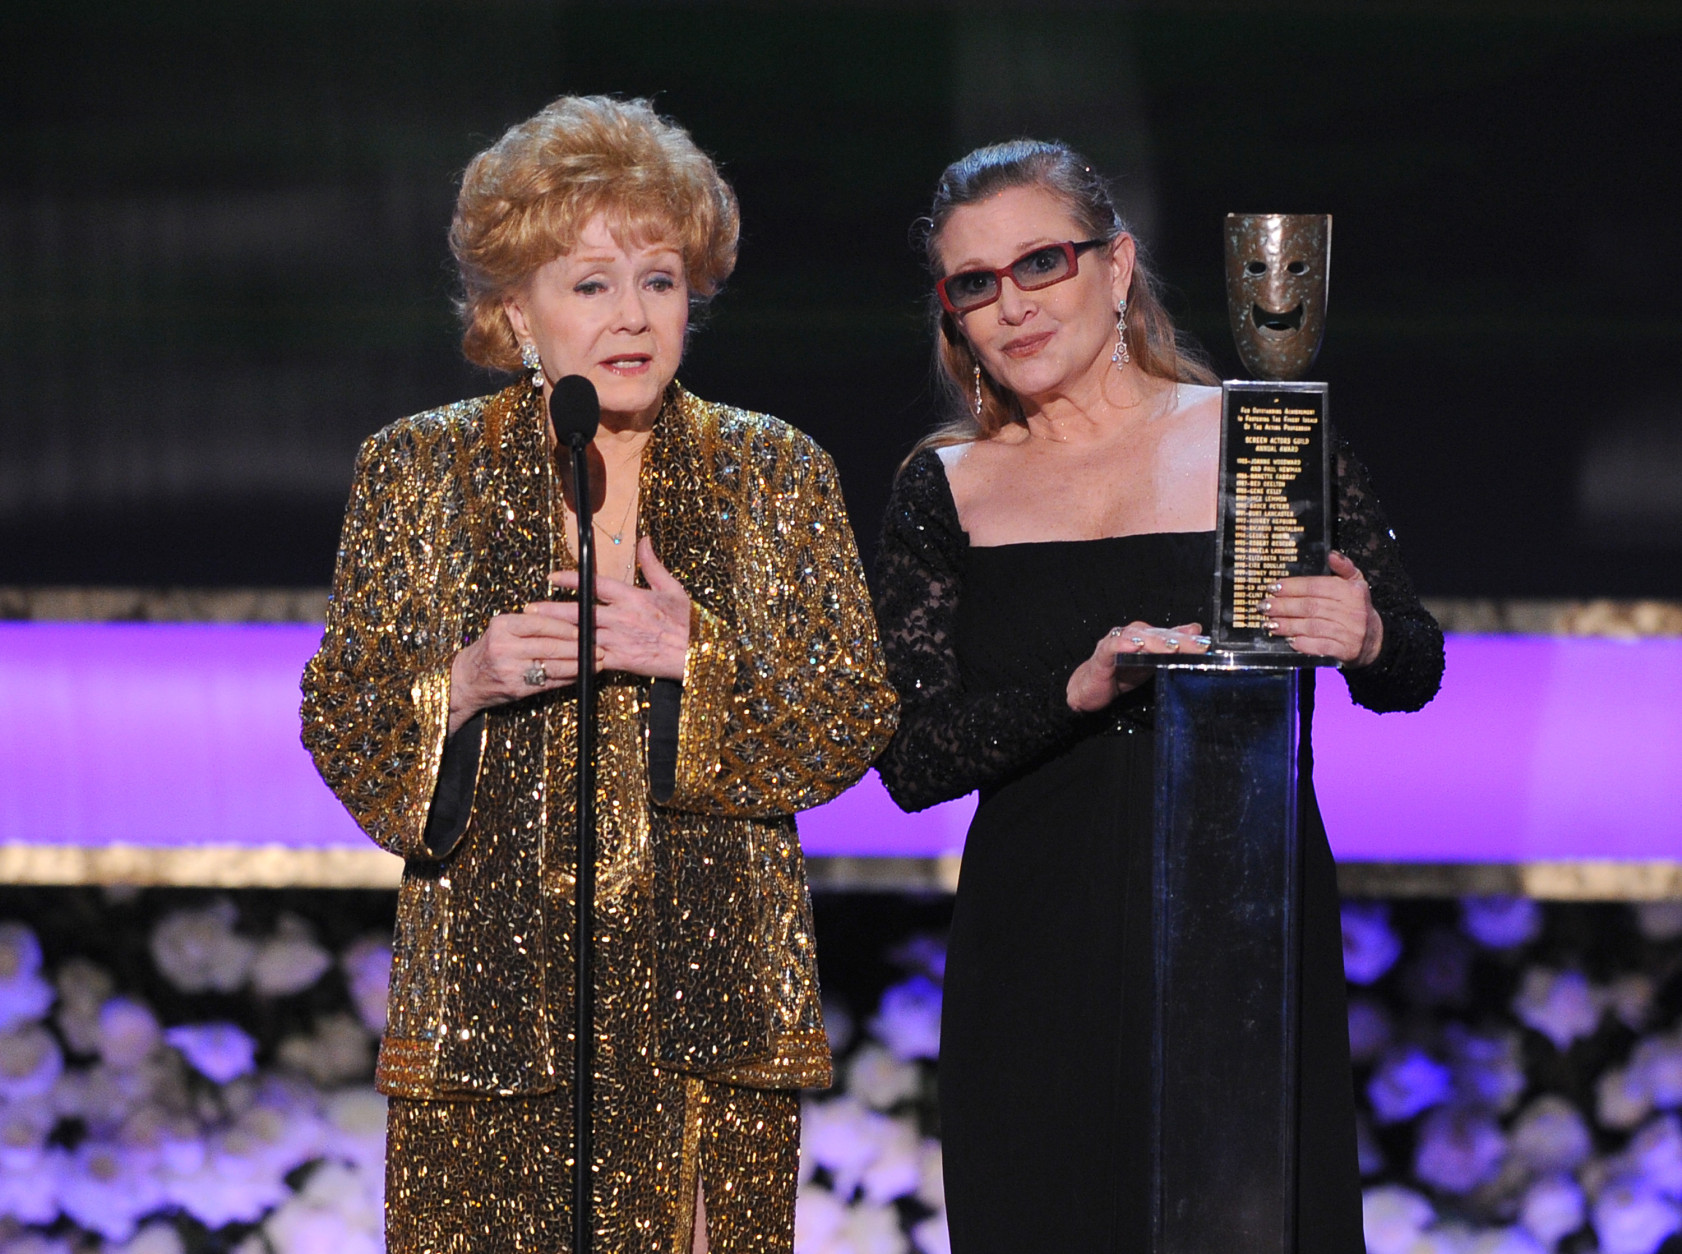 Carrie Fisher, right, presents Debbie Reynolds with the Screen Actors Guild life achievement award at the 21st annual Screen Actors Guild Awards at the Shrine Auditorium on Sunday, Jan. 25, 2015, in Los Angeles. (Photo by Vince Bucci/Invision/AP)